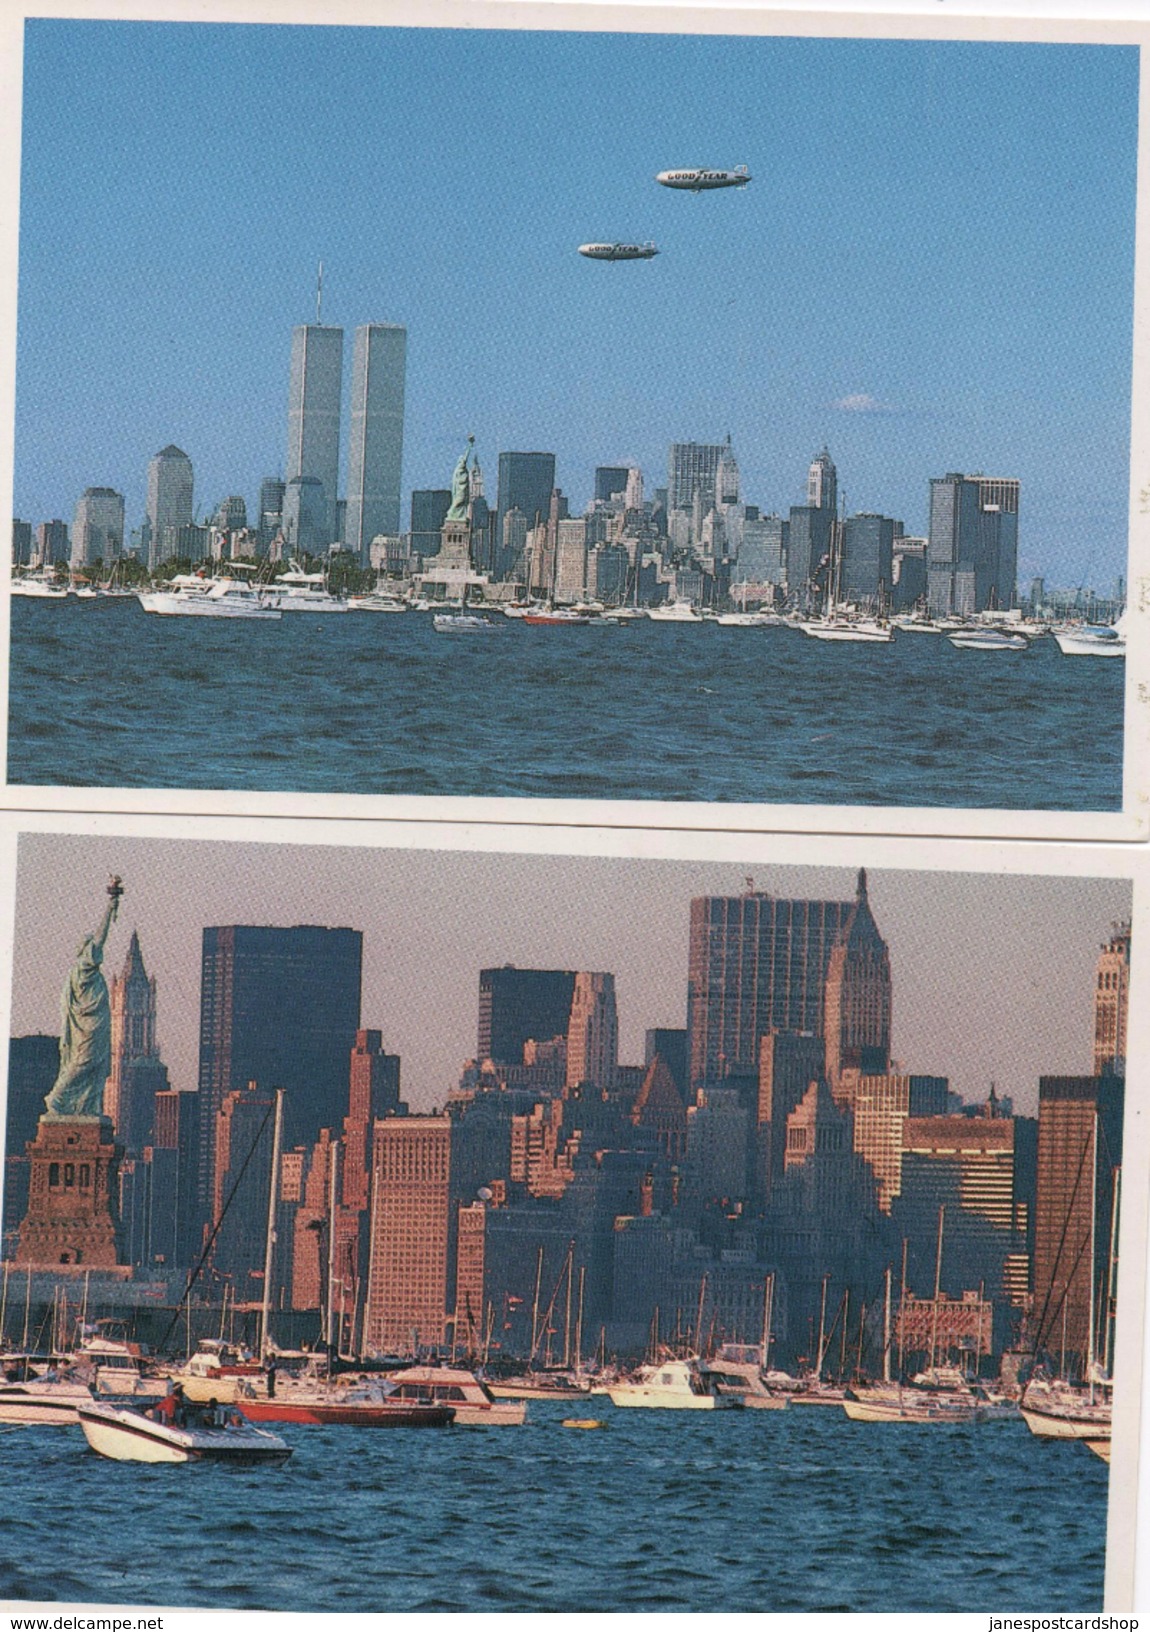 TWO MODERN POSTCARDS - THE STATUE OF LIBERTY IN NEW YORK HARBOUR AND NEW YORK SKYLINE - World Trade Center